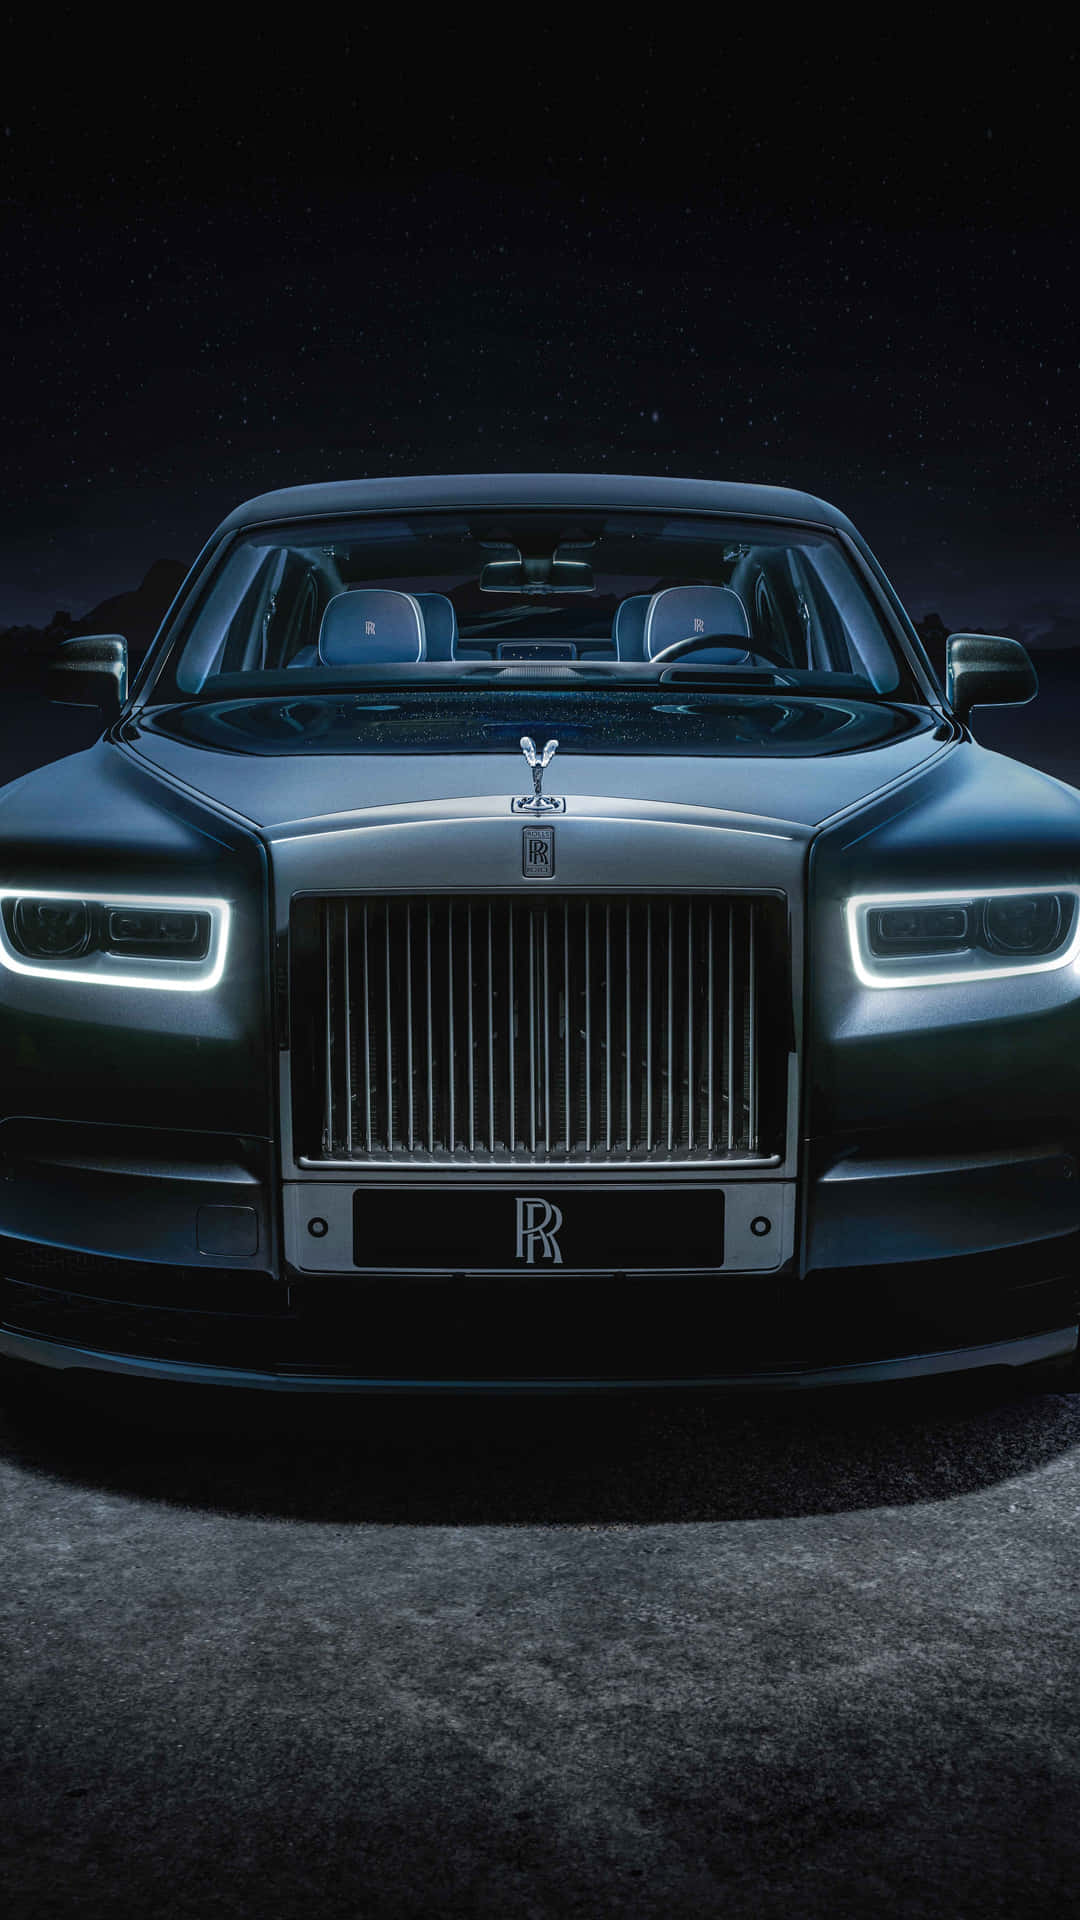 Caption: Luxury In Motion: The Timeless Elegance Of Rolls Royce.